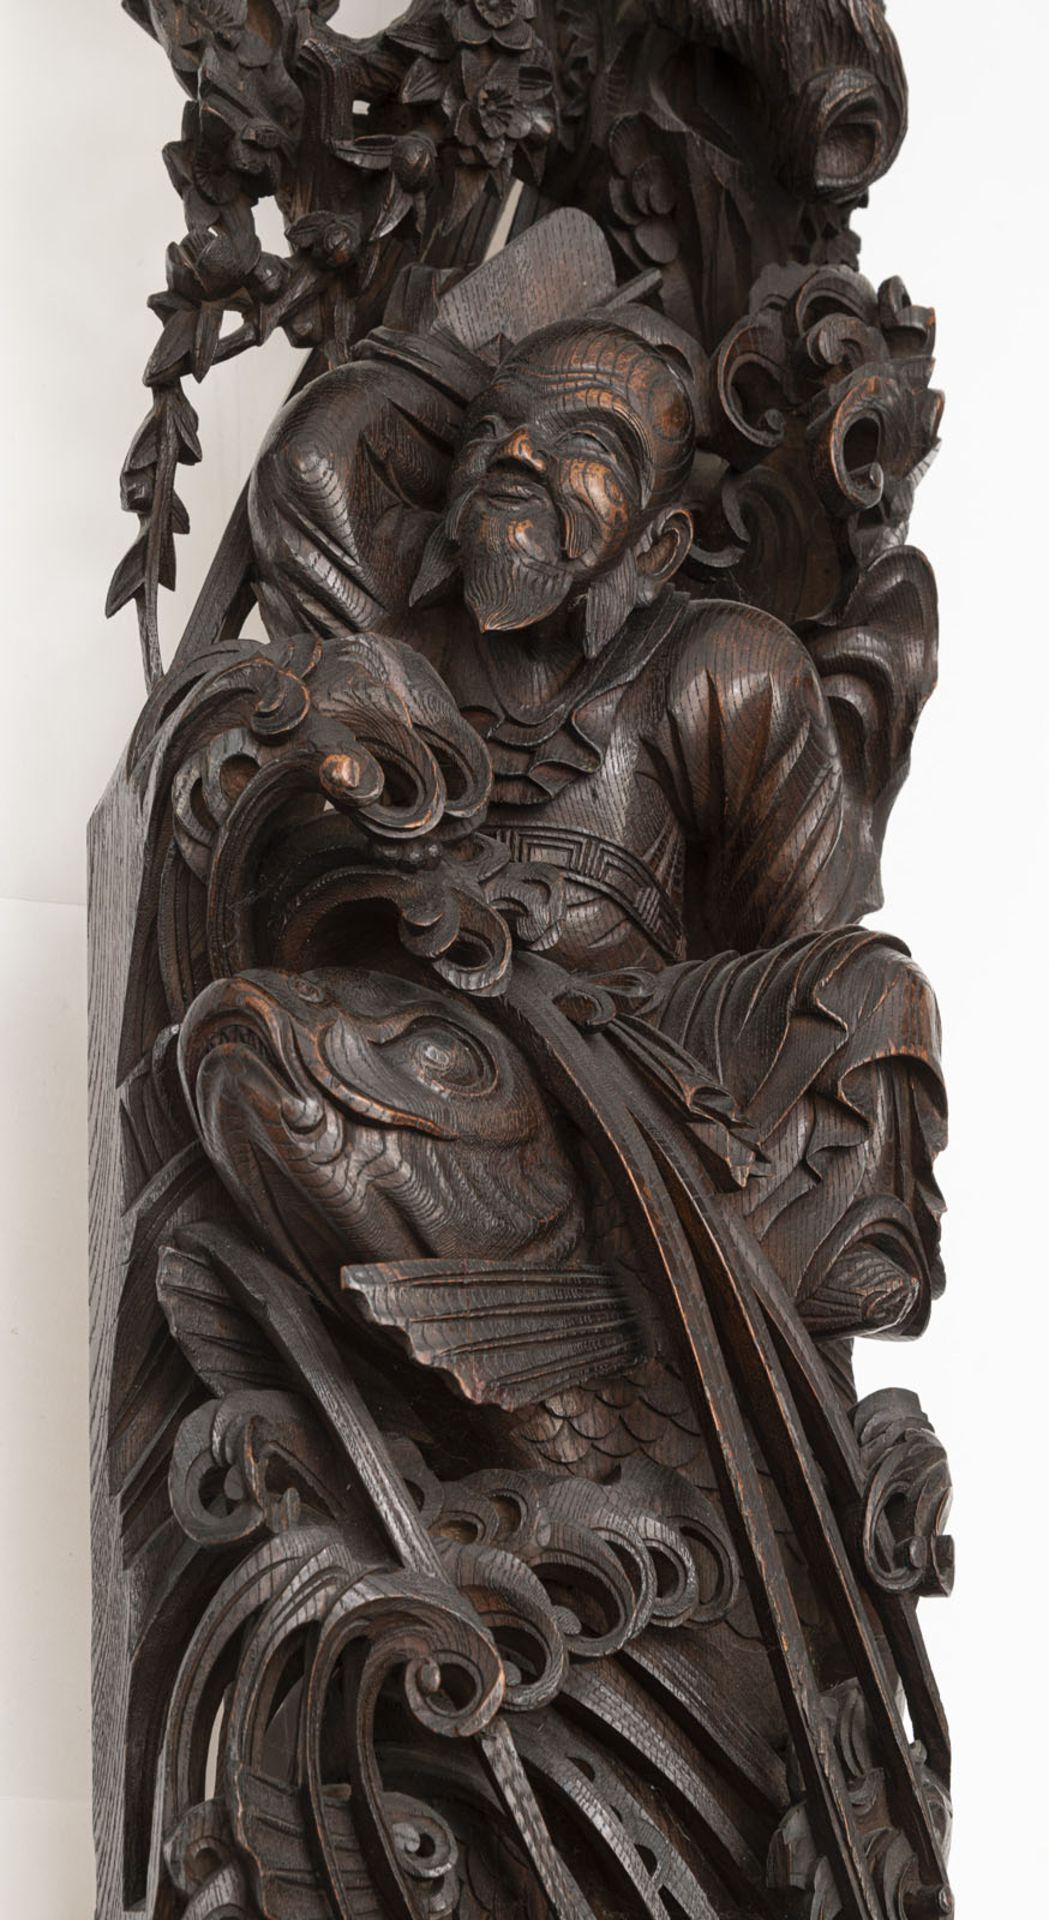 A RELIEF CARVED WOOD ARCHWAY DEPICTING DRAGONS AND FIGURES - Image 4 of 4